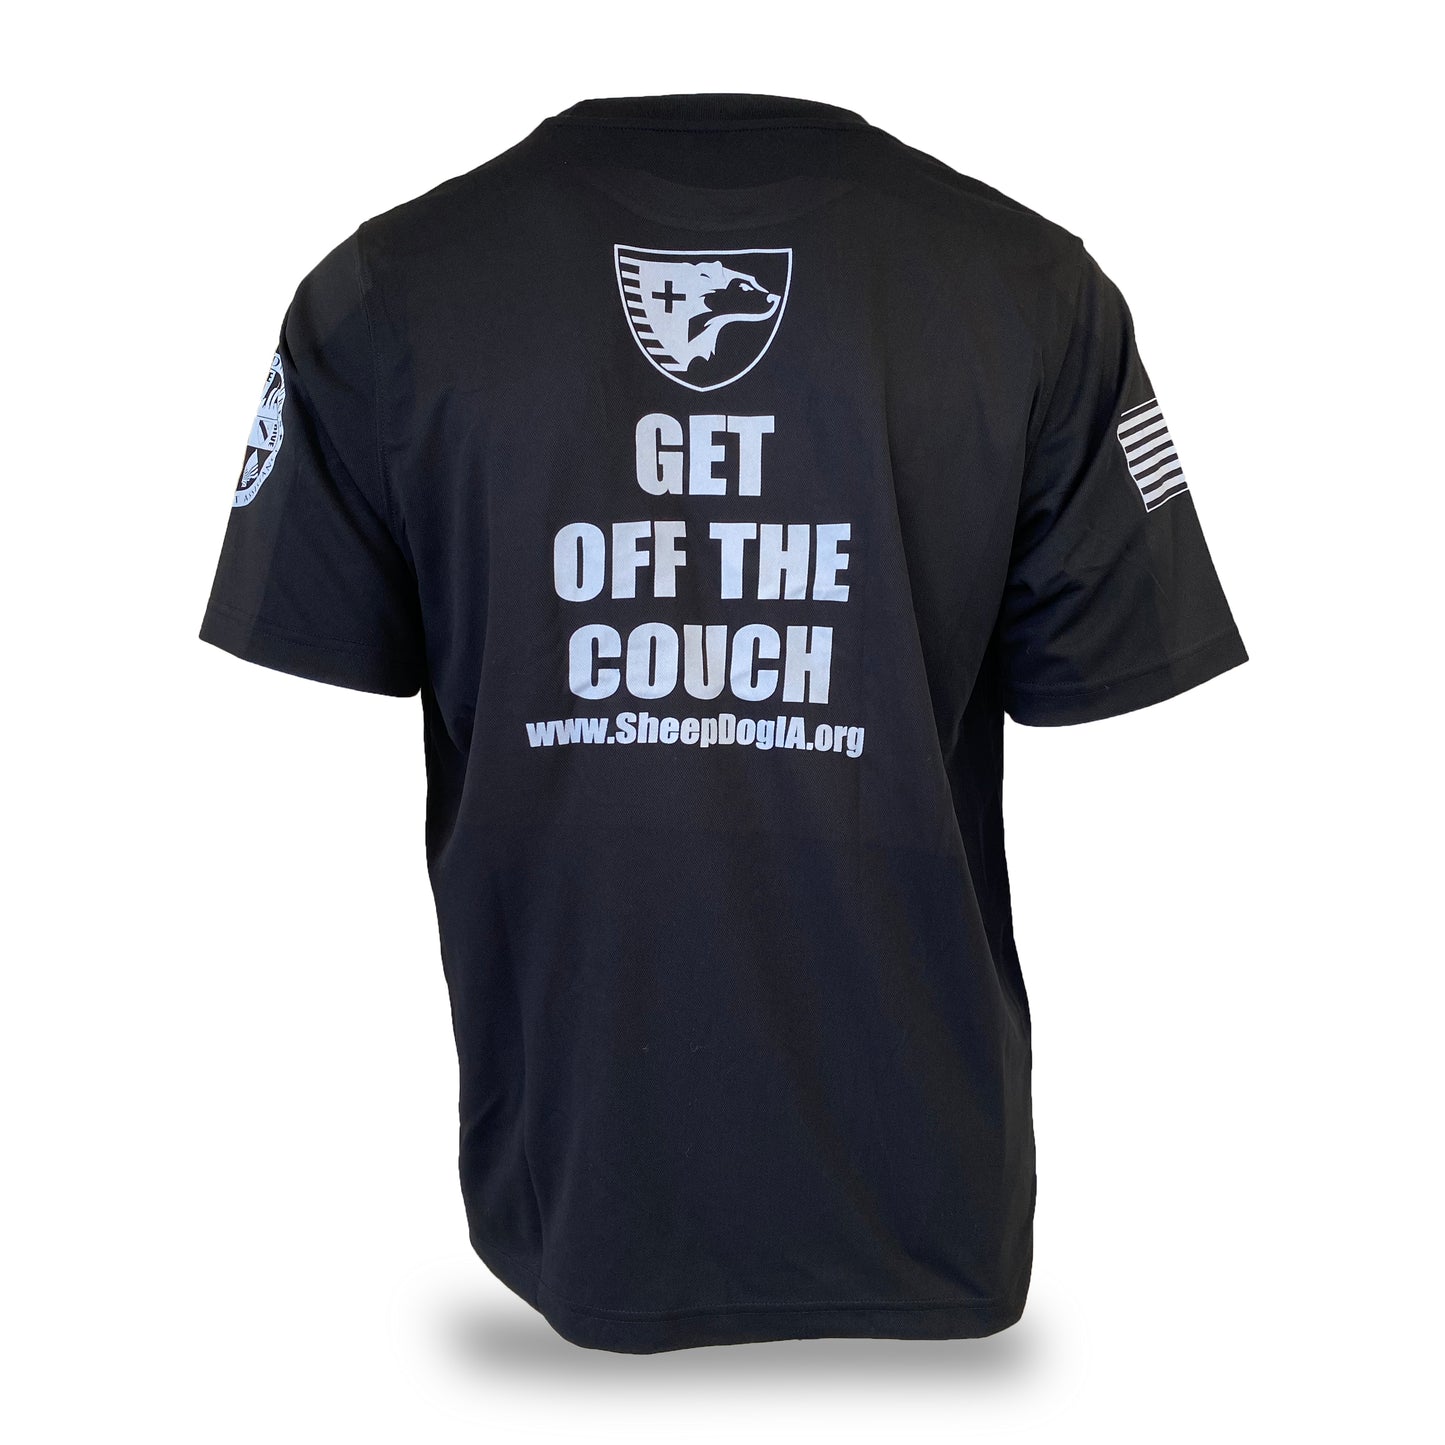 “GET OFF THE COUCH” Outdoor Adventure T-shirt